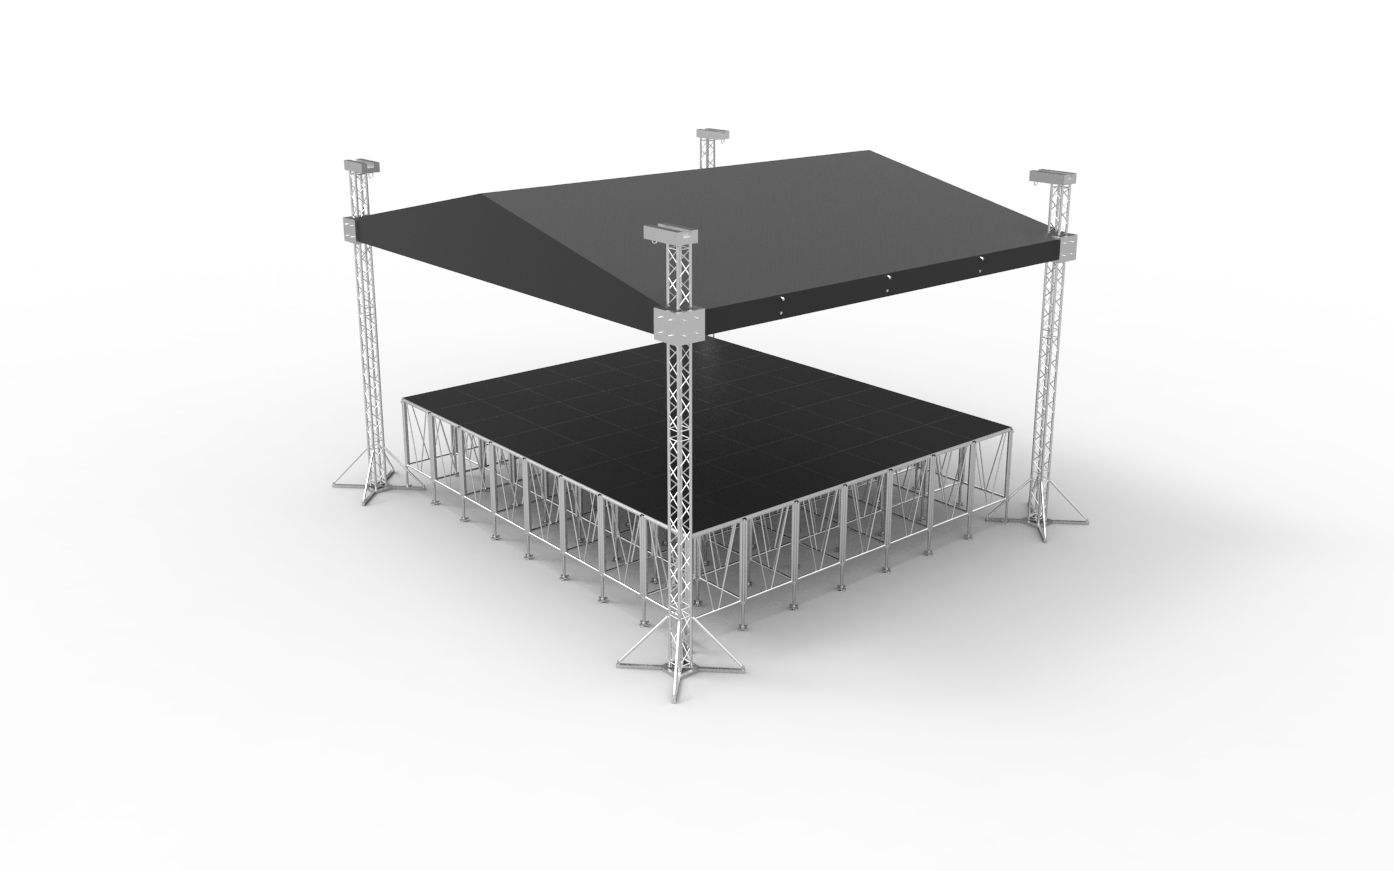 black canope stage roof truss tower structure